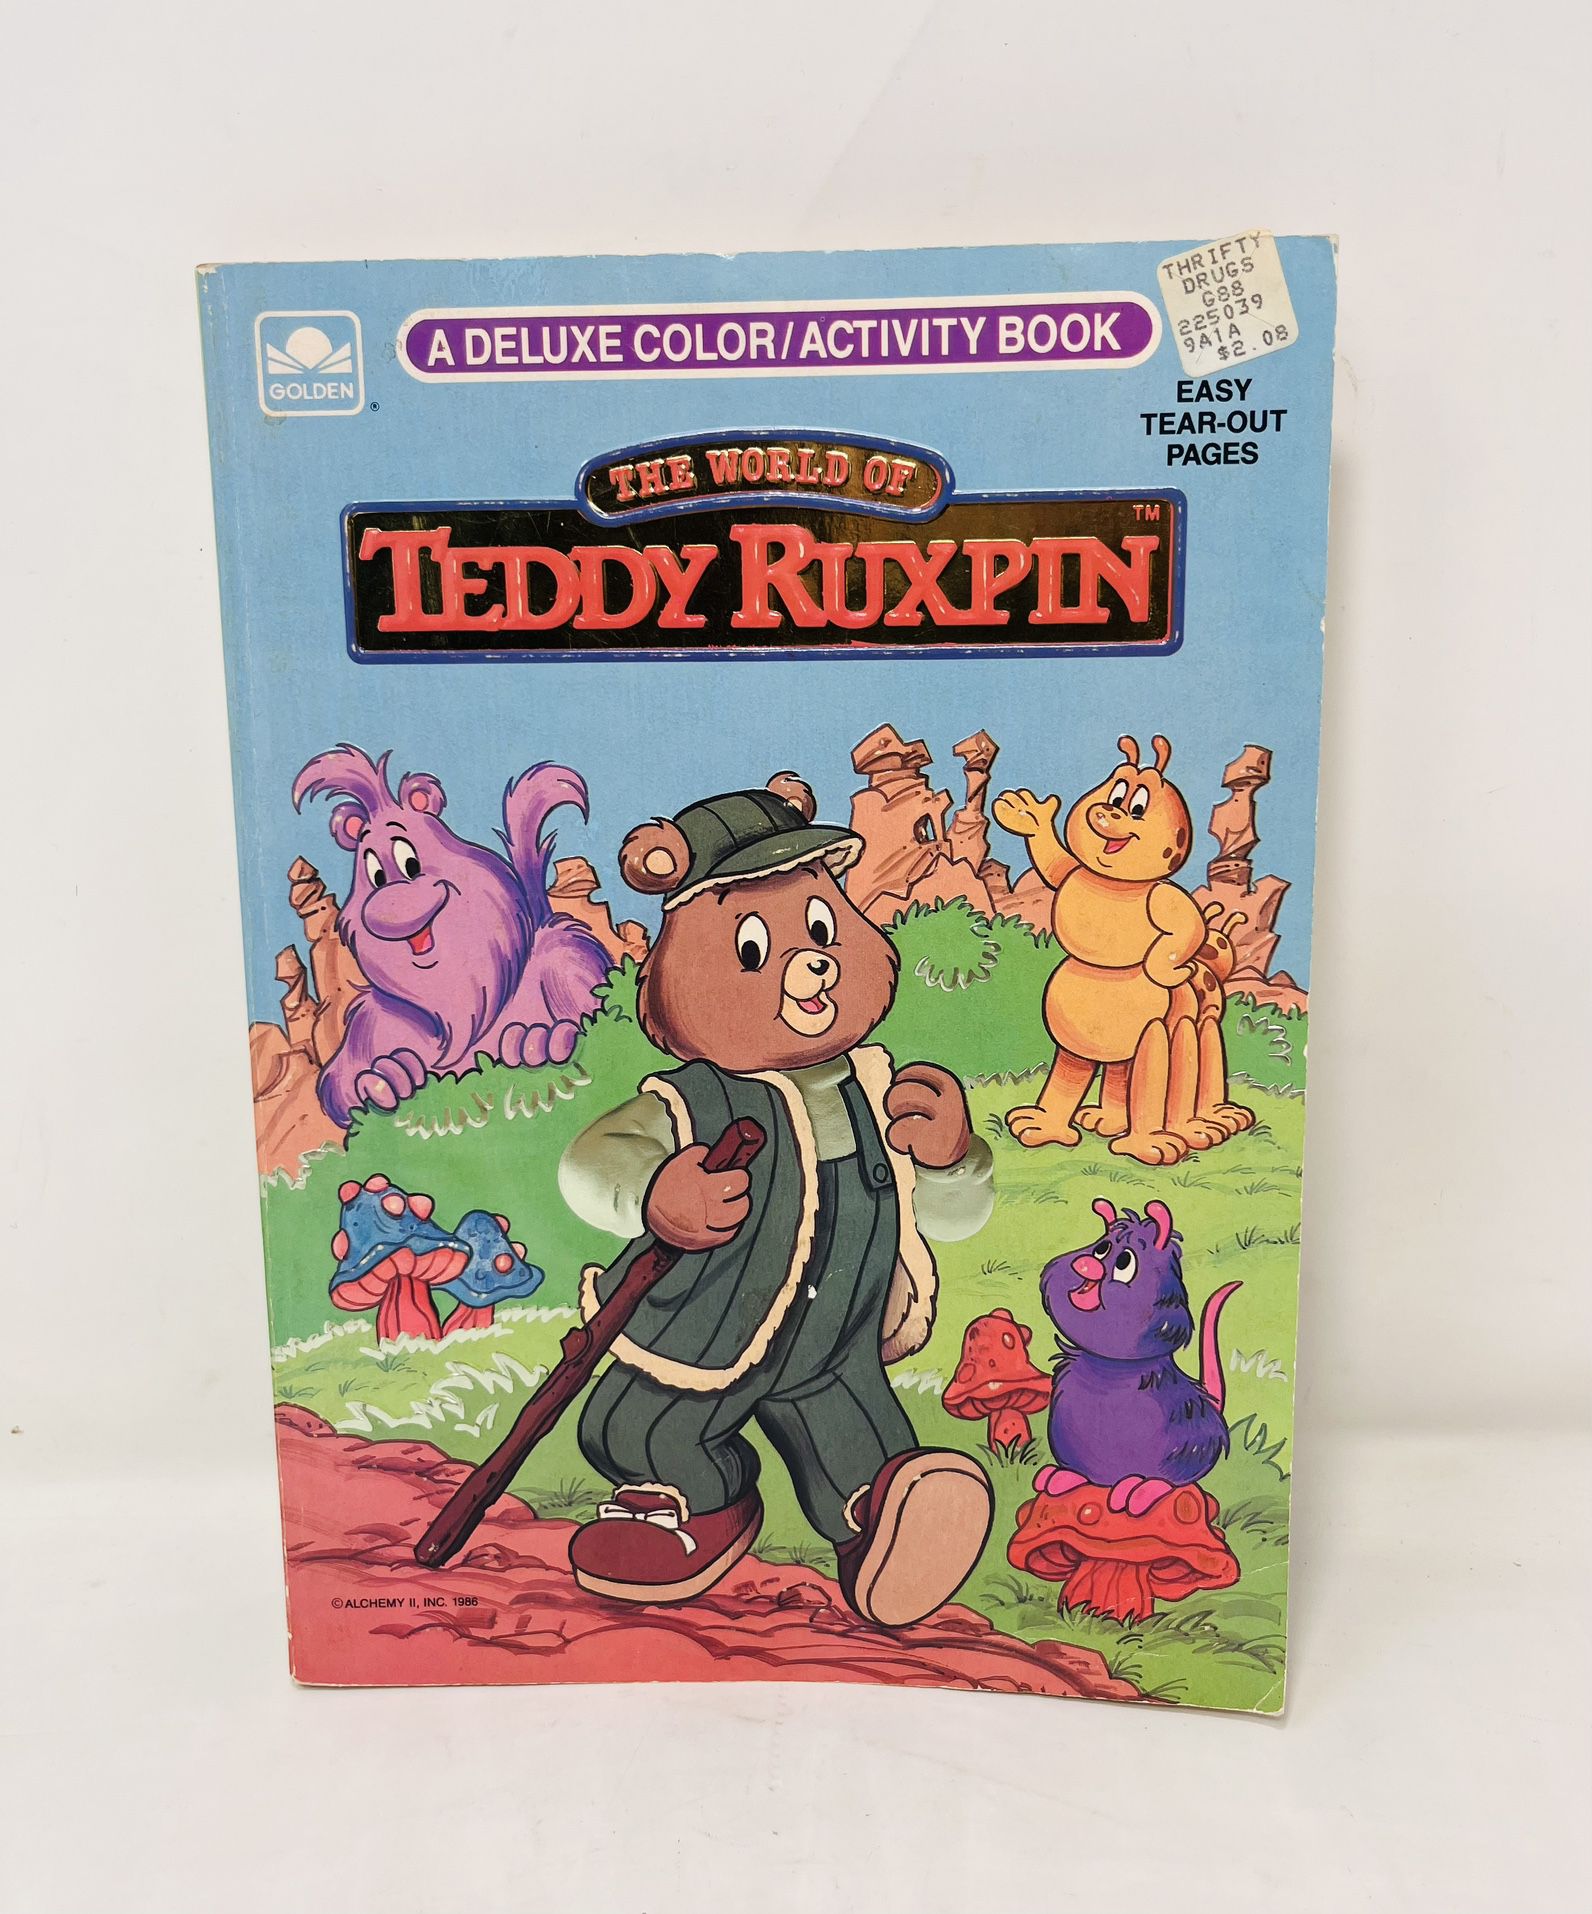 The World Of Teddy Ruxpin Coloring Deluxe Activity Book 1986 Golden Book Vintage